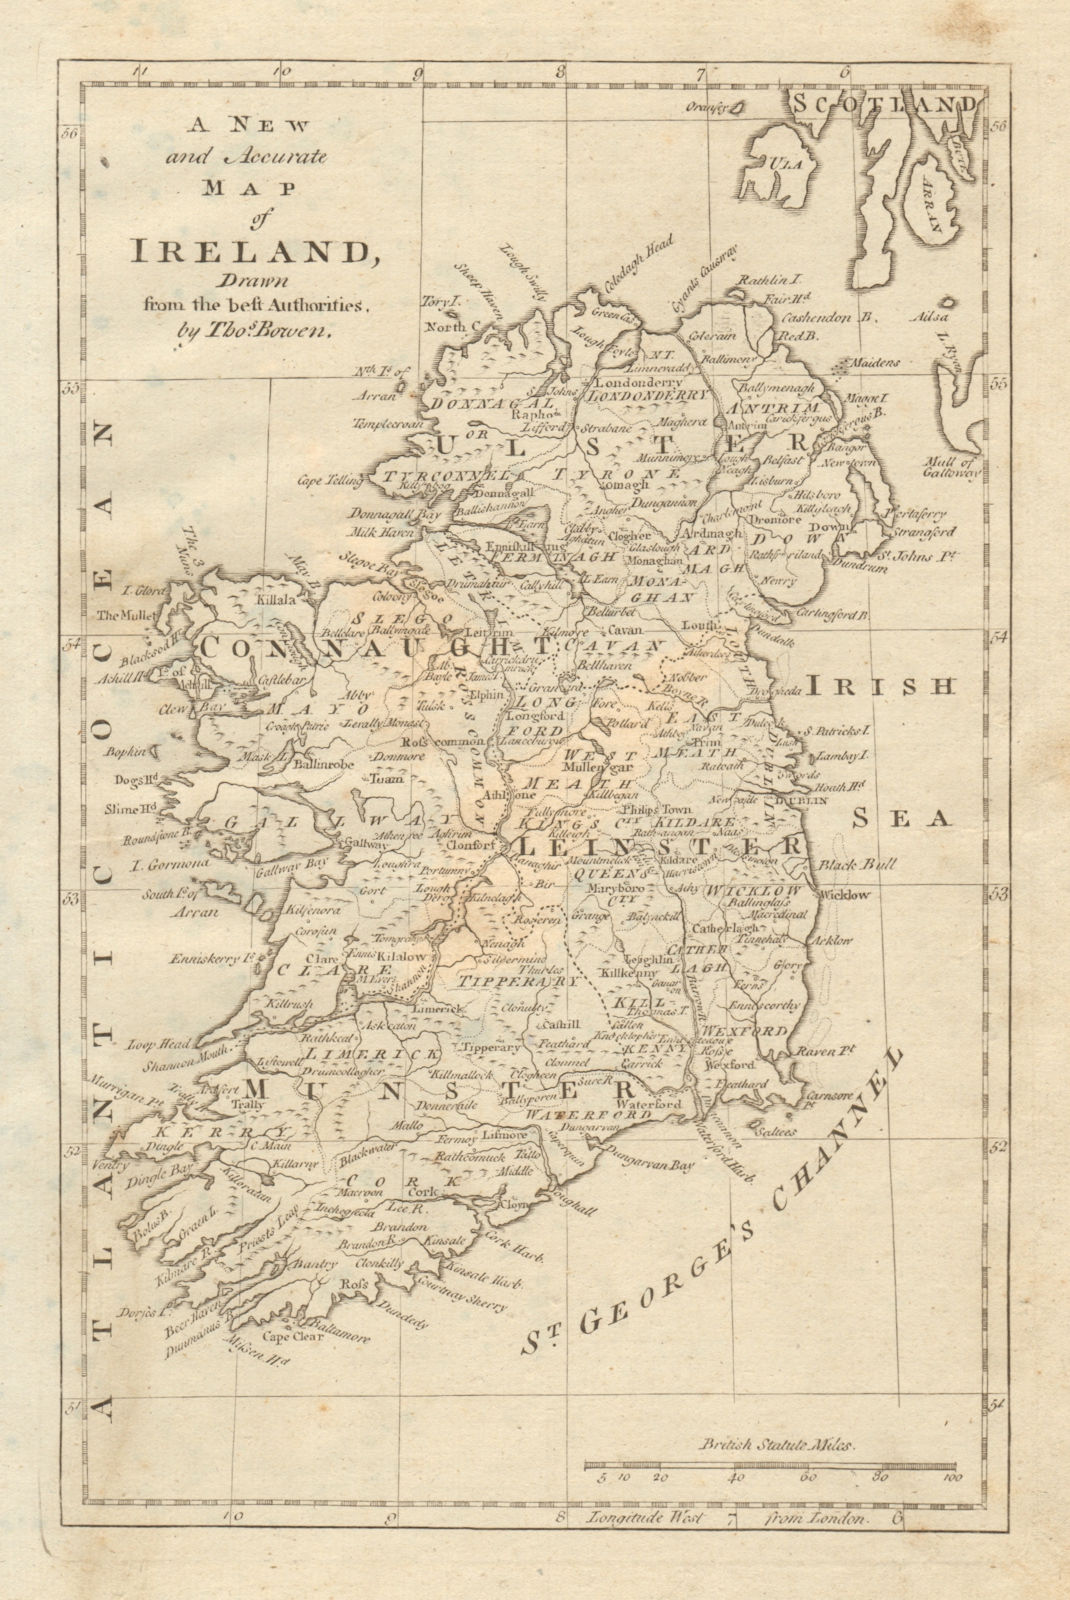 A new and accurate map of Ireland drawn from best authorities. BOWEN 1789